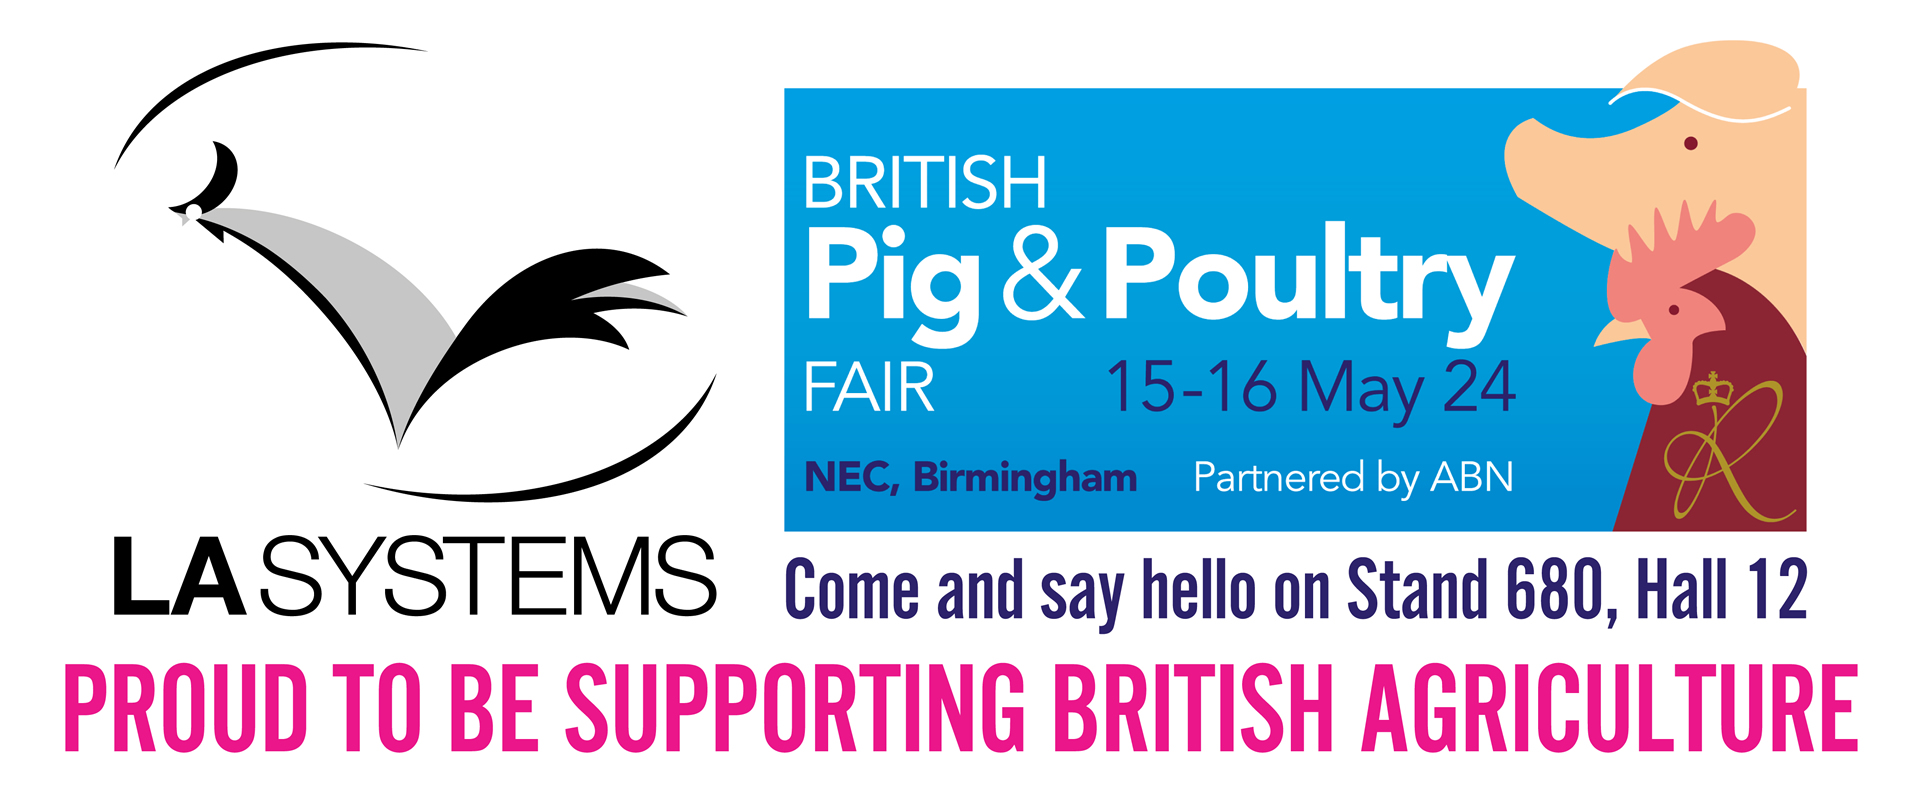 British Pig and Poultry Fair 15-16th May 24. NEC Birmingham. Come and say hello on stand 680, Hall 12